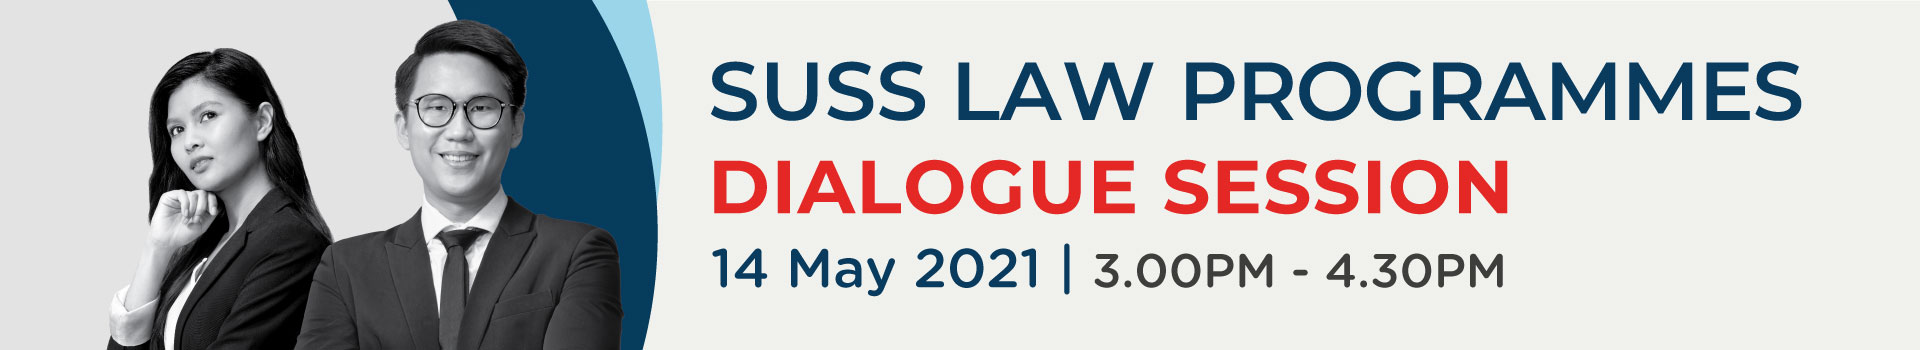 SLAW_Dialogue-Session_1b_Details-Desktop-Banner-14MAY2021_1920-x-350px-FA